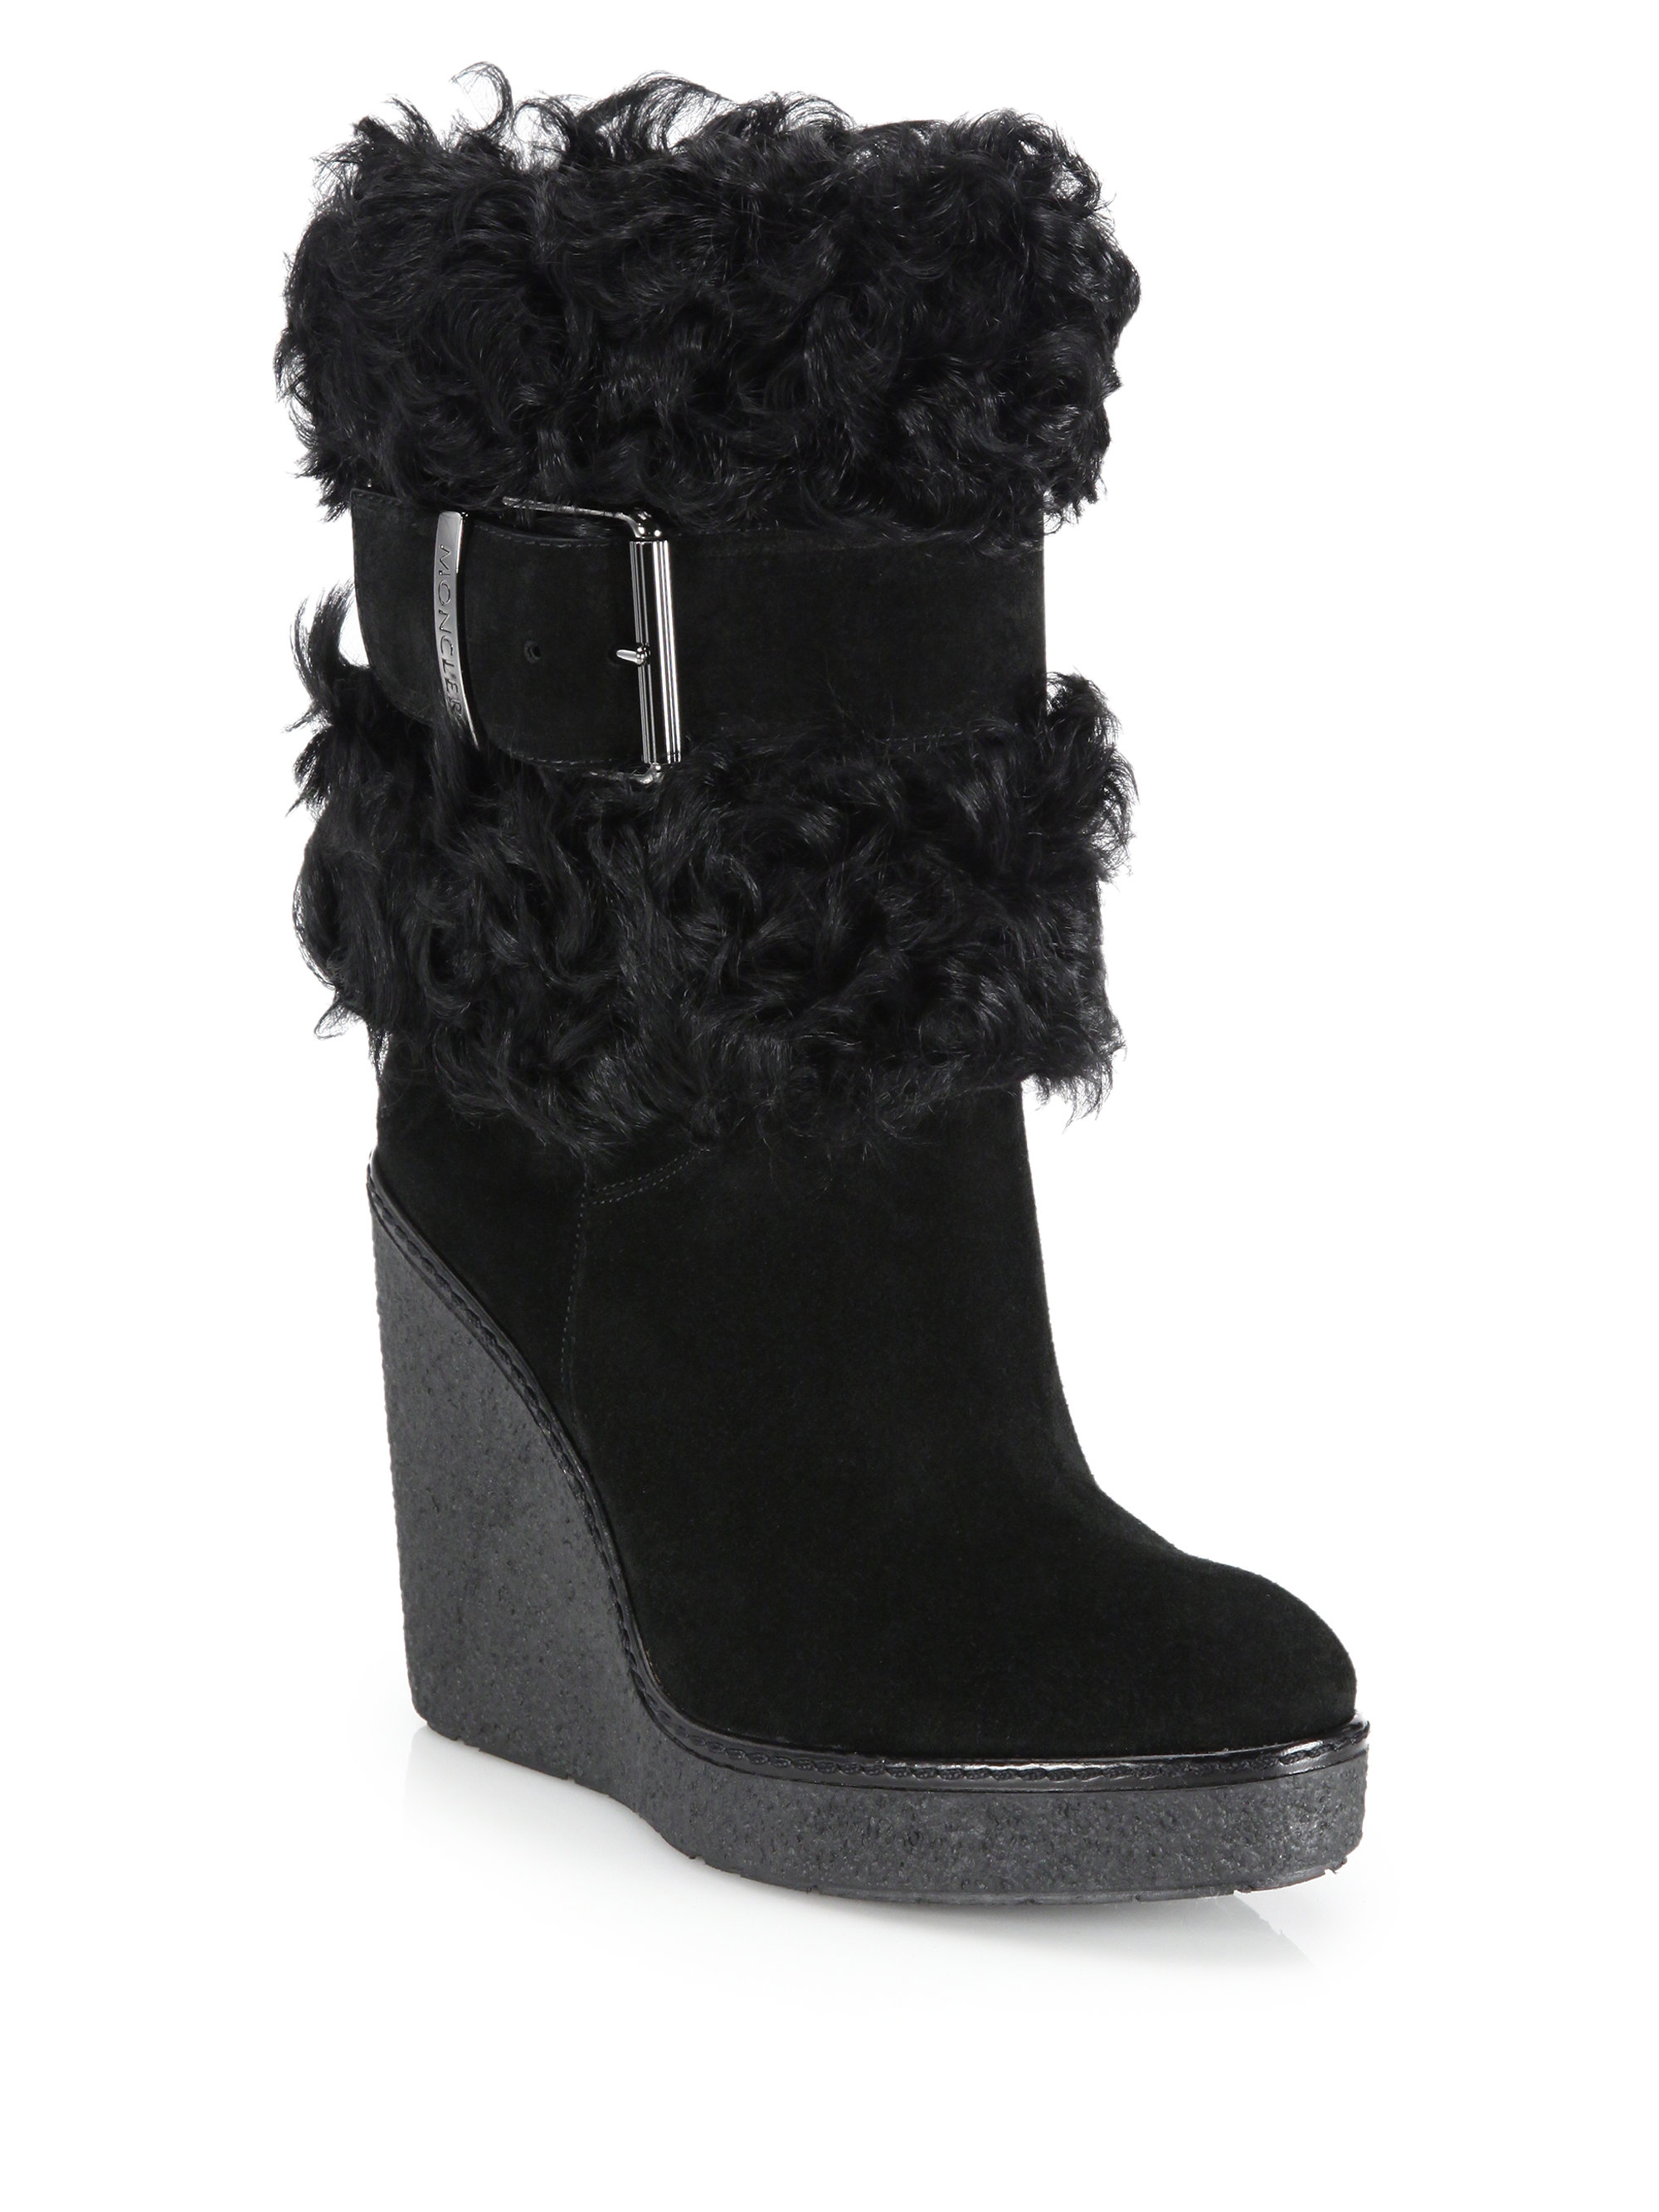 Moncler Marguerite Sheep Fur & Suede Buckled Boots in Black | Lyst